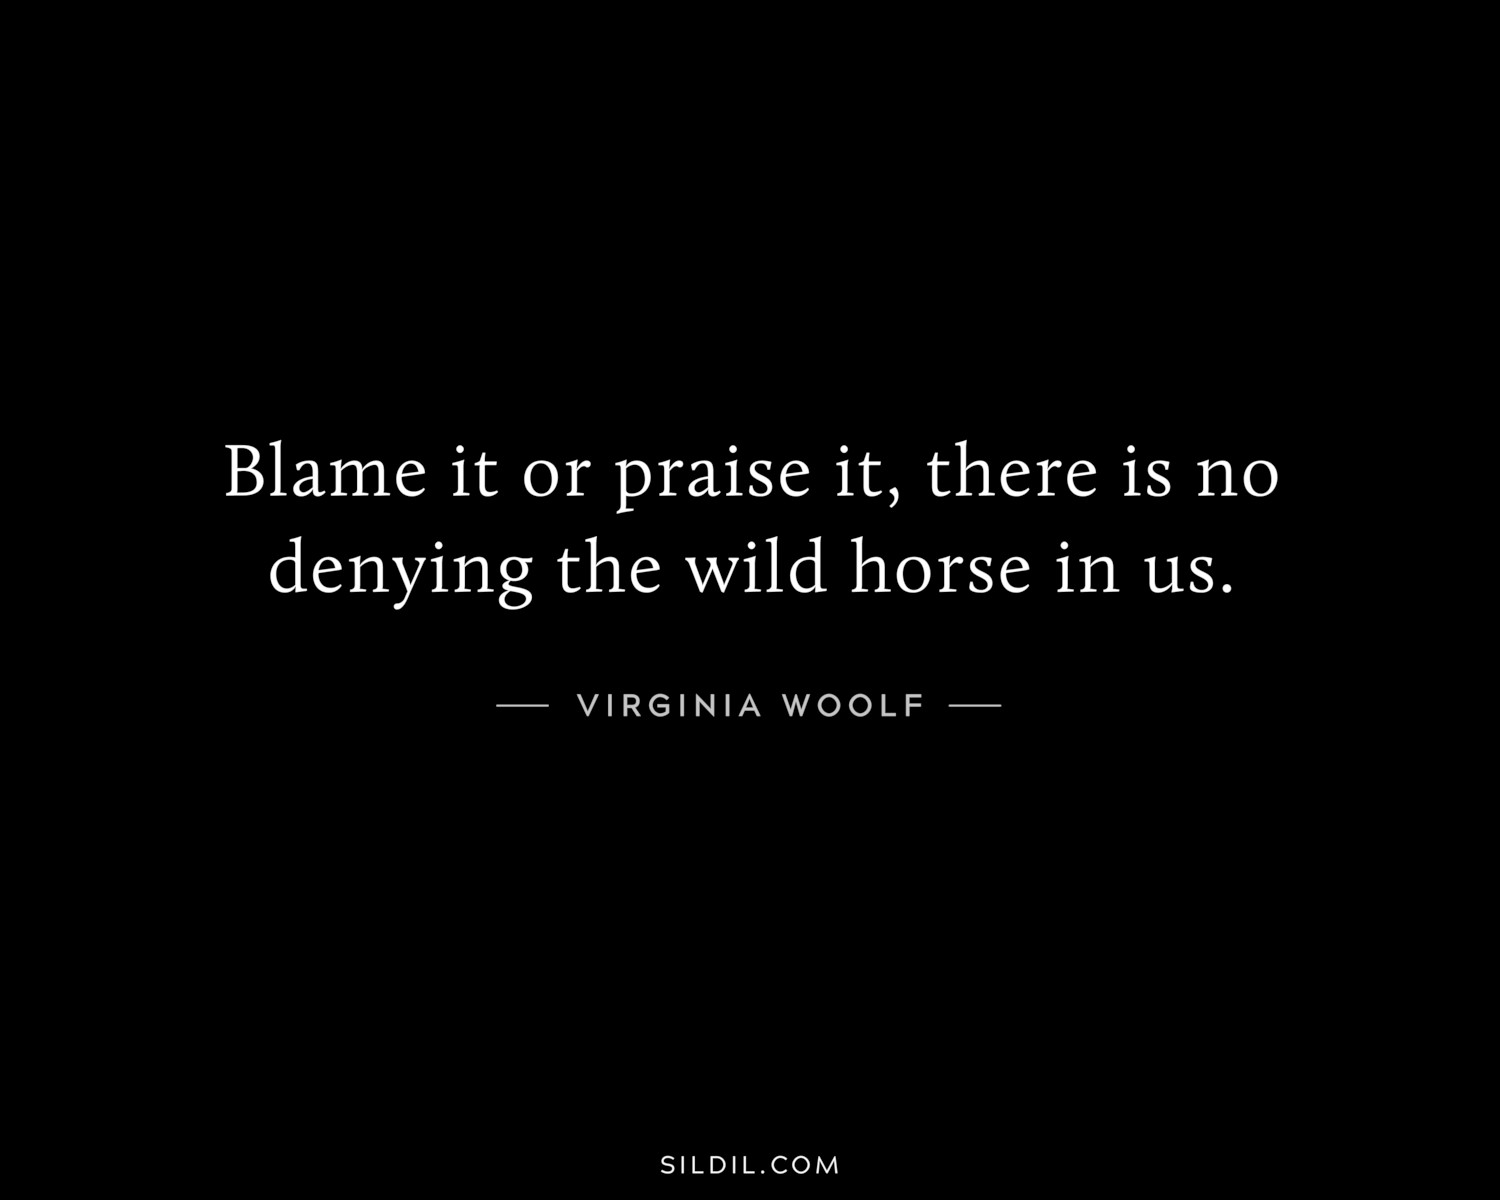 Blame it or praise it, there is no denying the wild horse in us. 